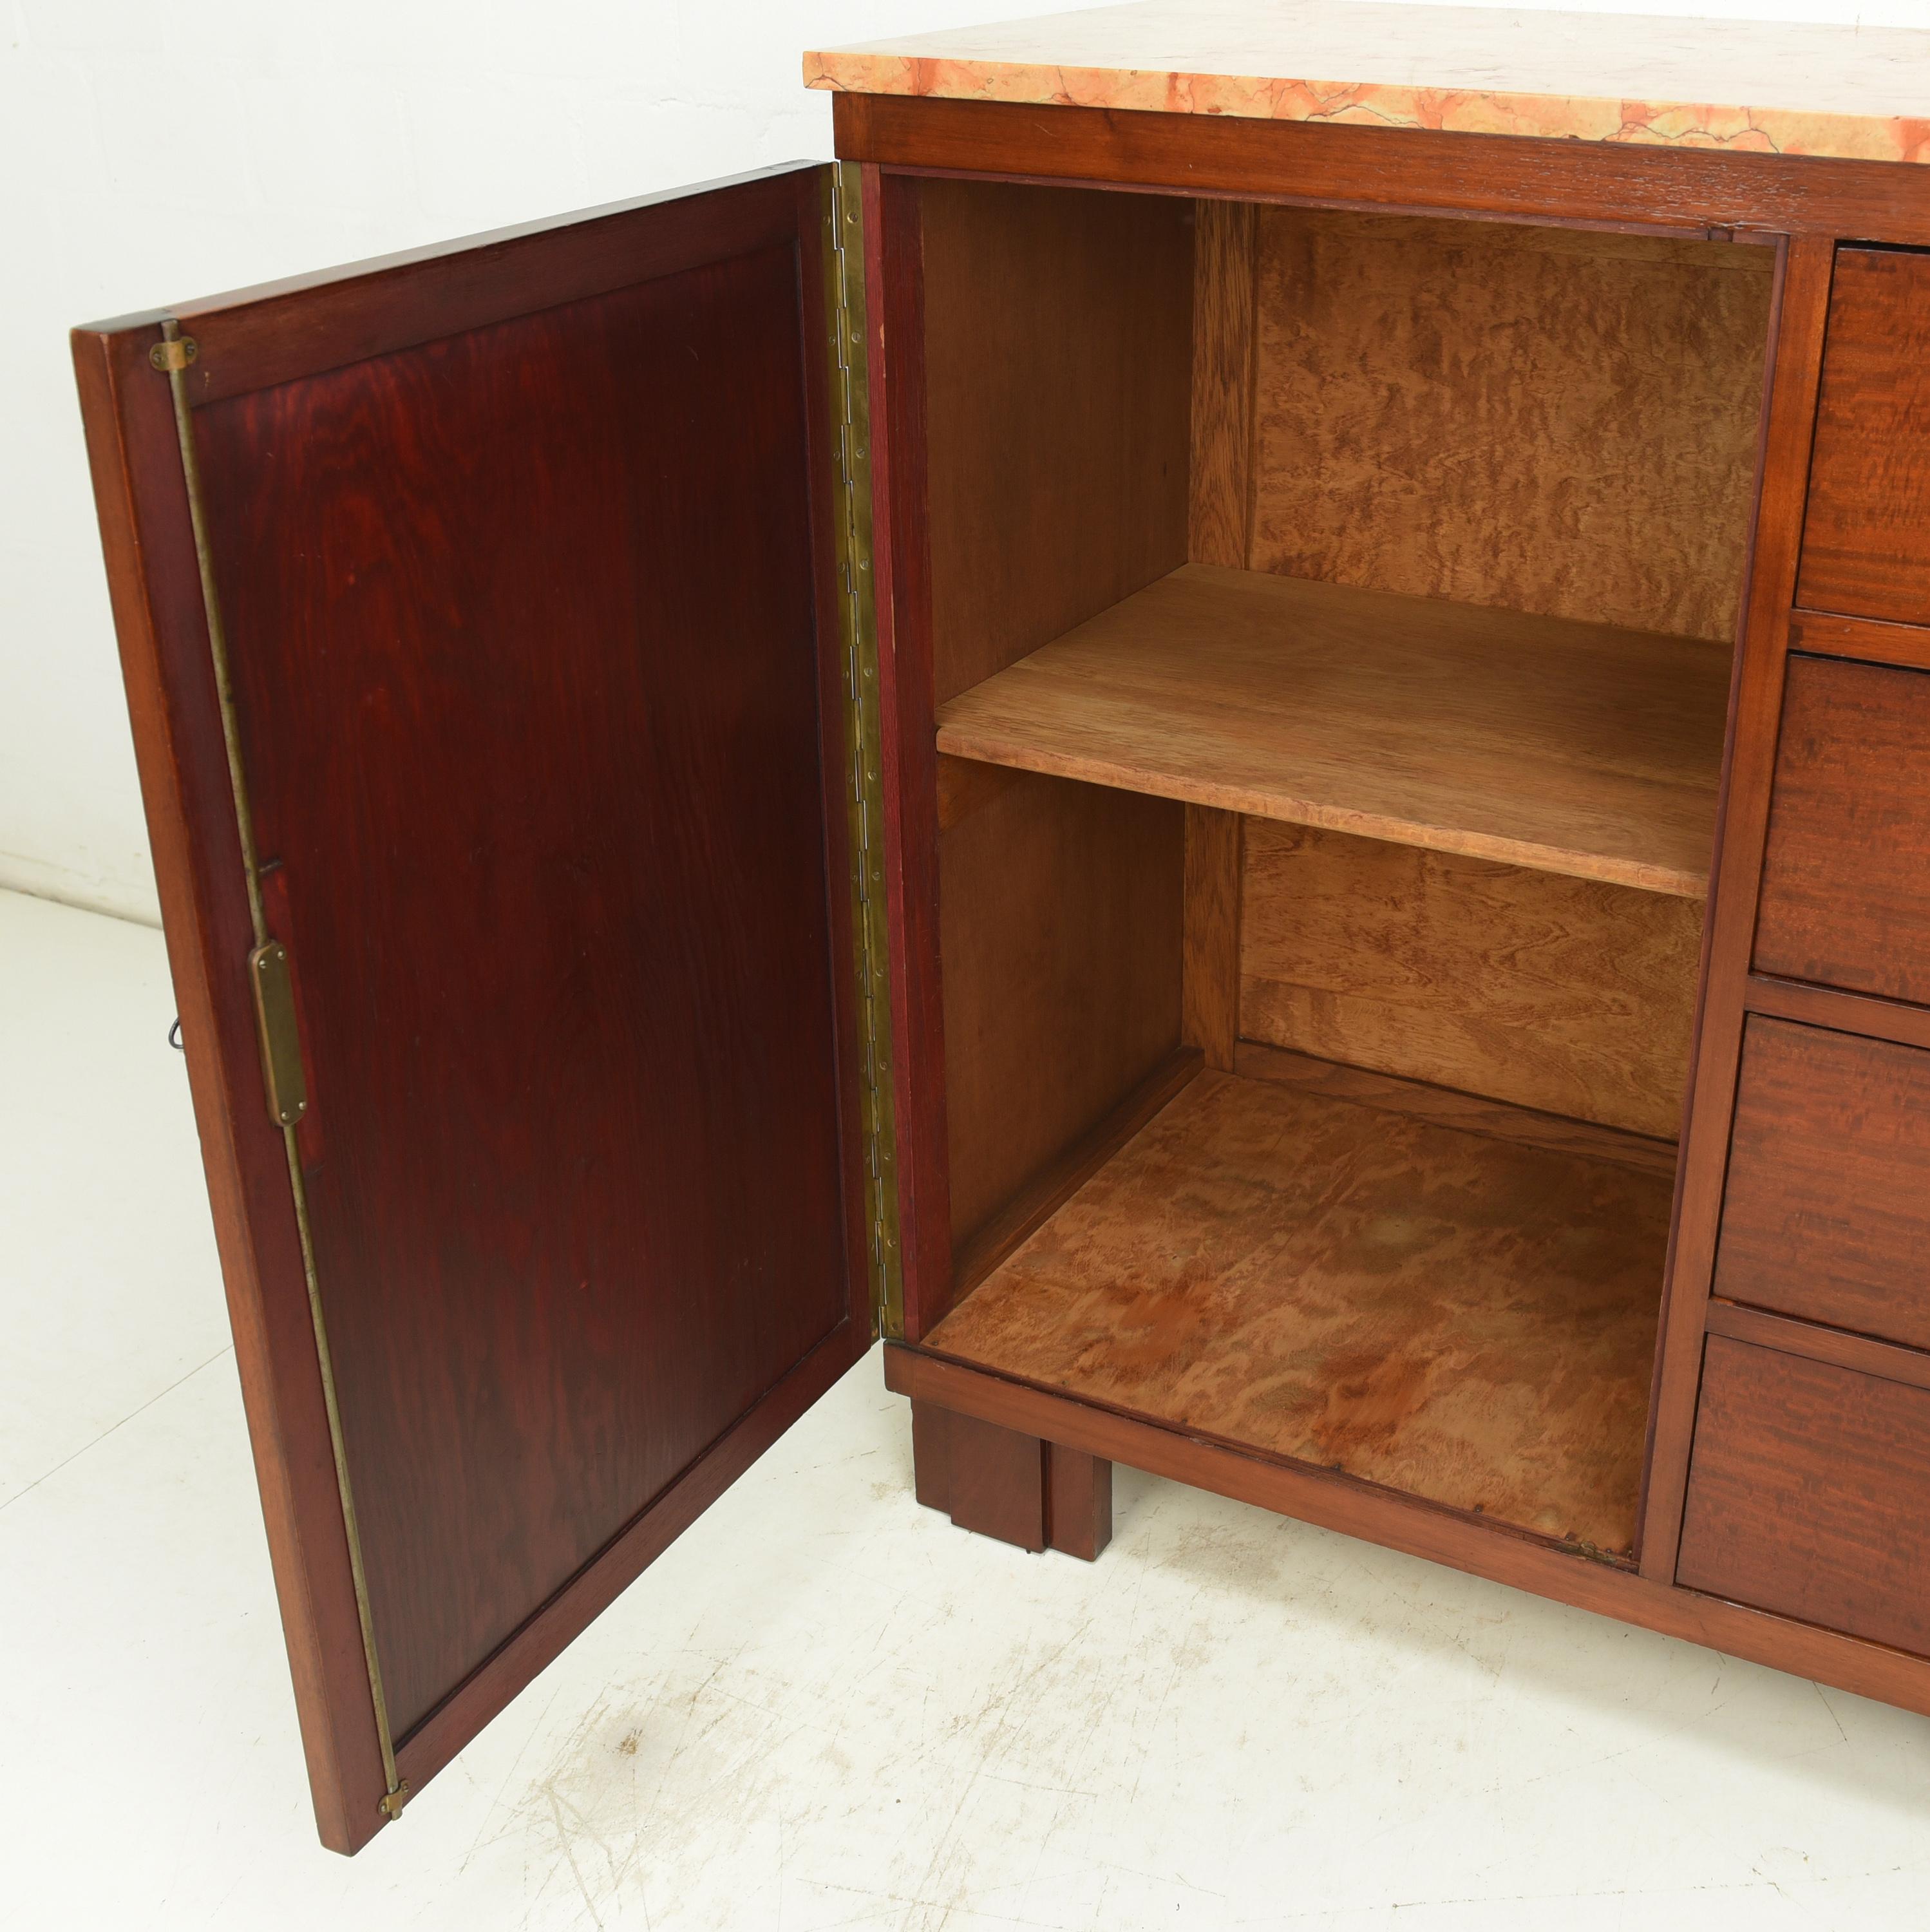 20th Century Art Deco Long Sideboard in Mahogany, circa 1925 For Sale